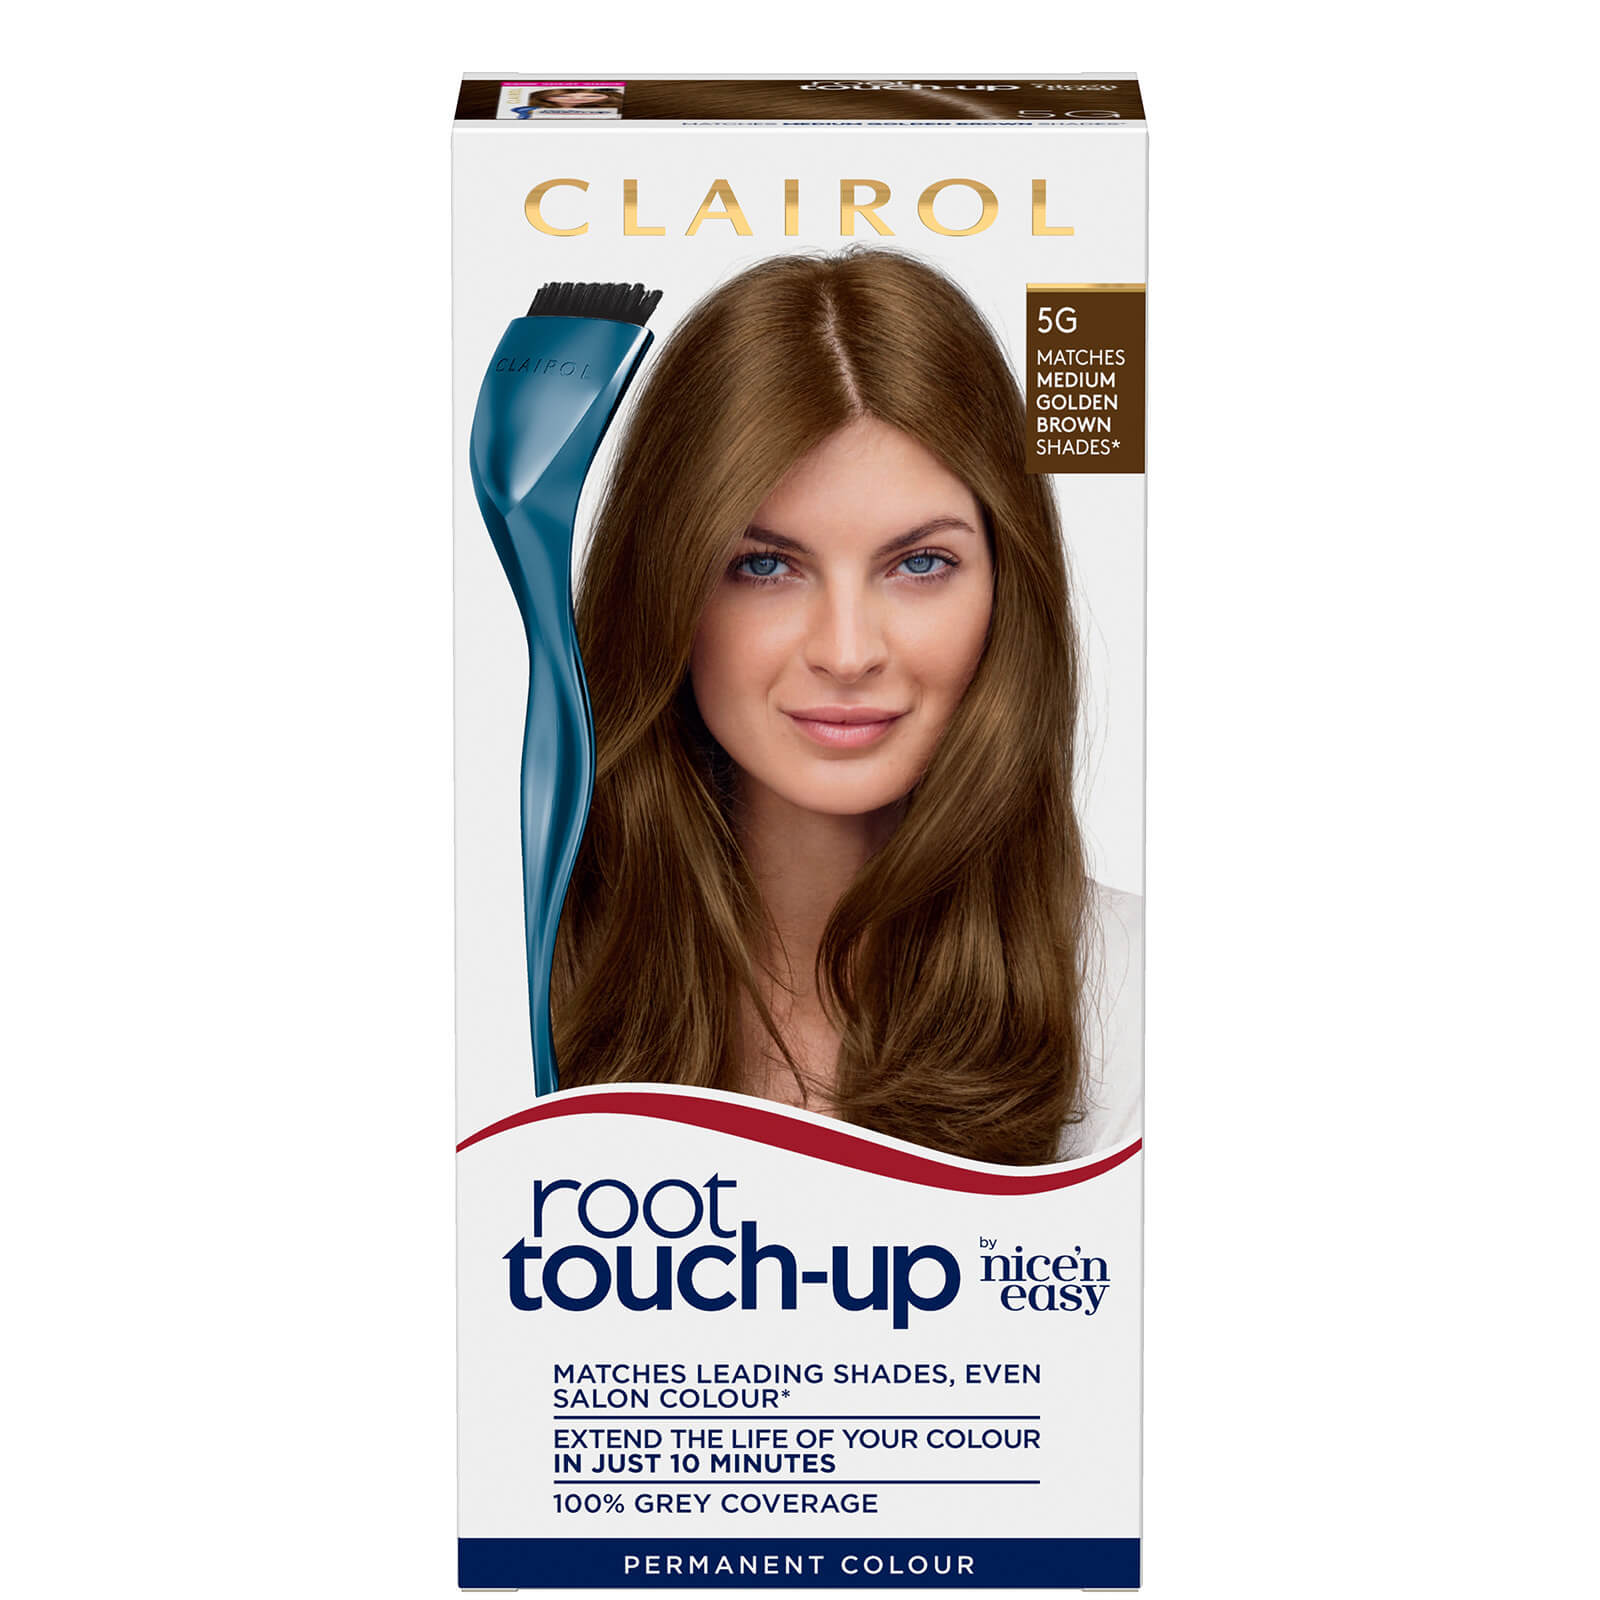 Clairol Root Touch-Up Permanent Hair Dye Long-lasting Intensifying Colour with Full Coverage 30ml (Various Shades) - 5G Medium Golden Brown